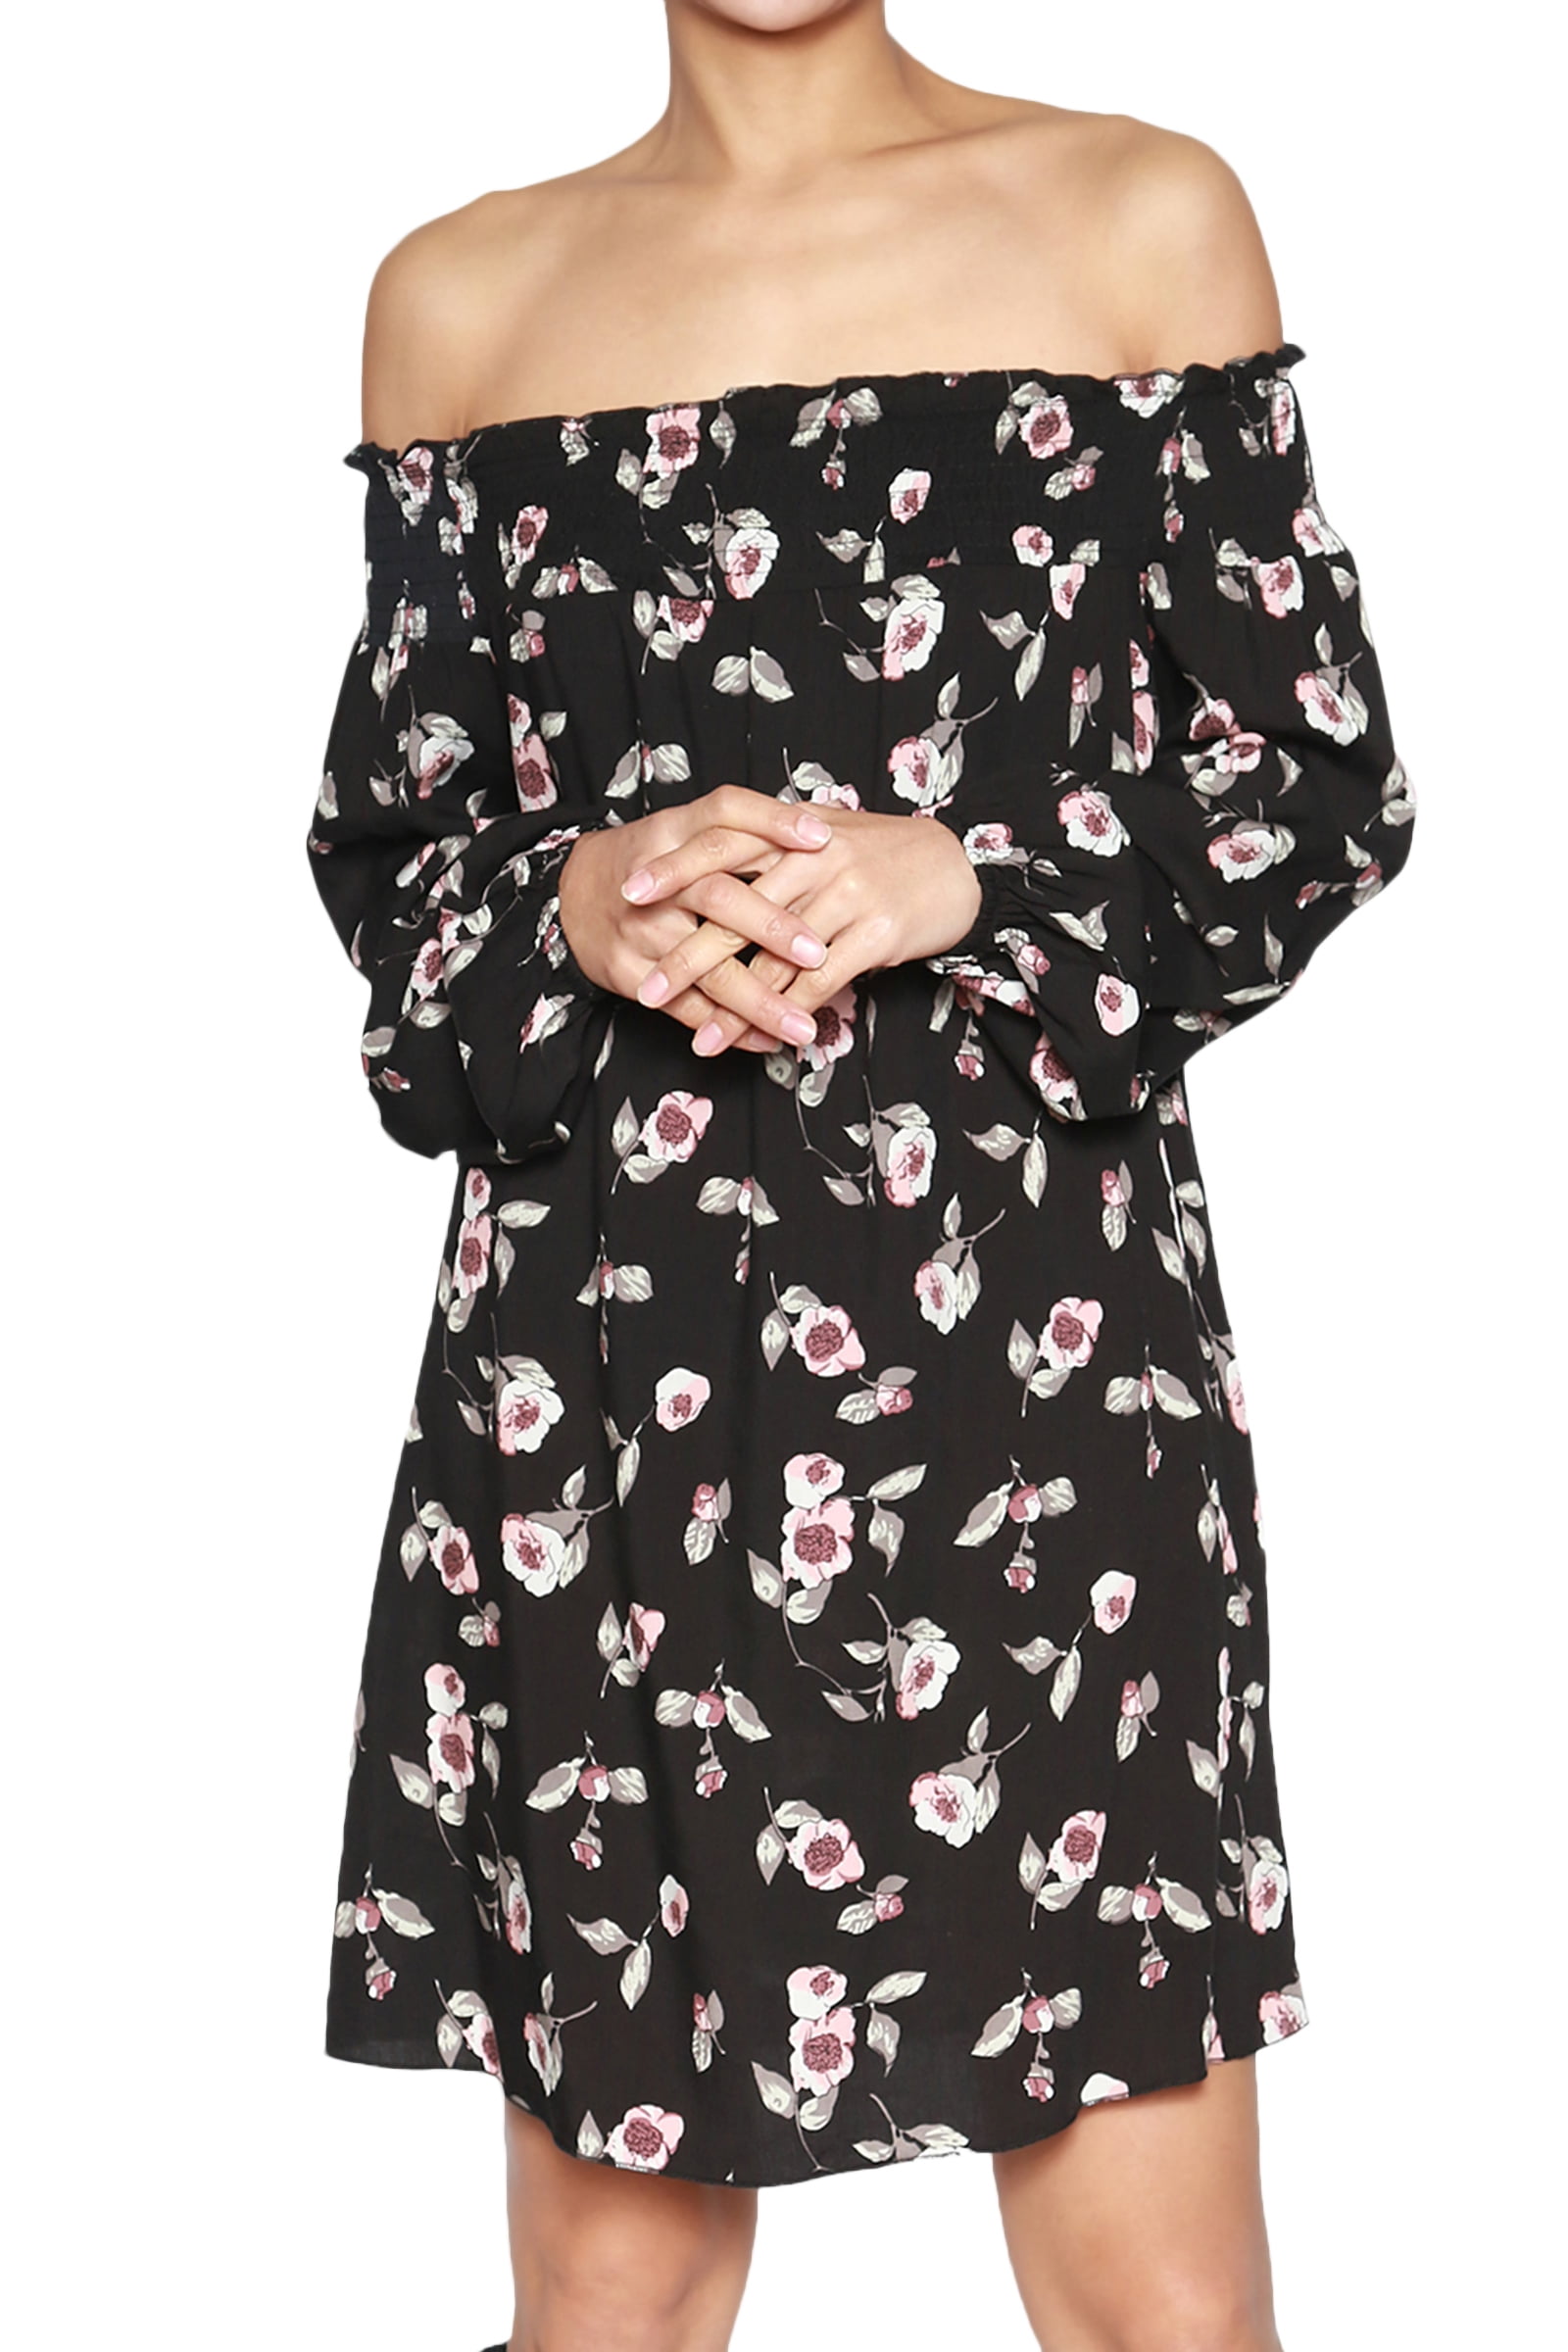 TheMogan Off The Shoulder Floral Print Bell Long Sleeve Romper Pretty One Piece